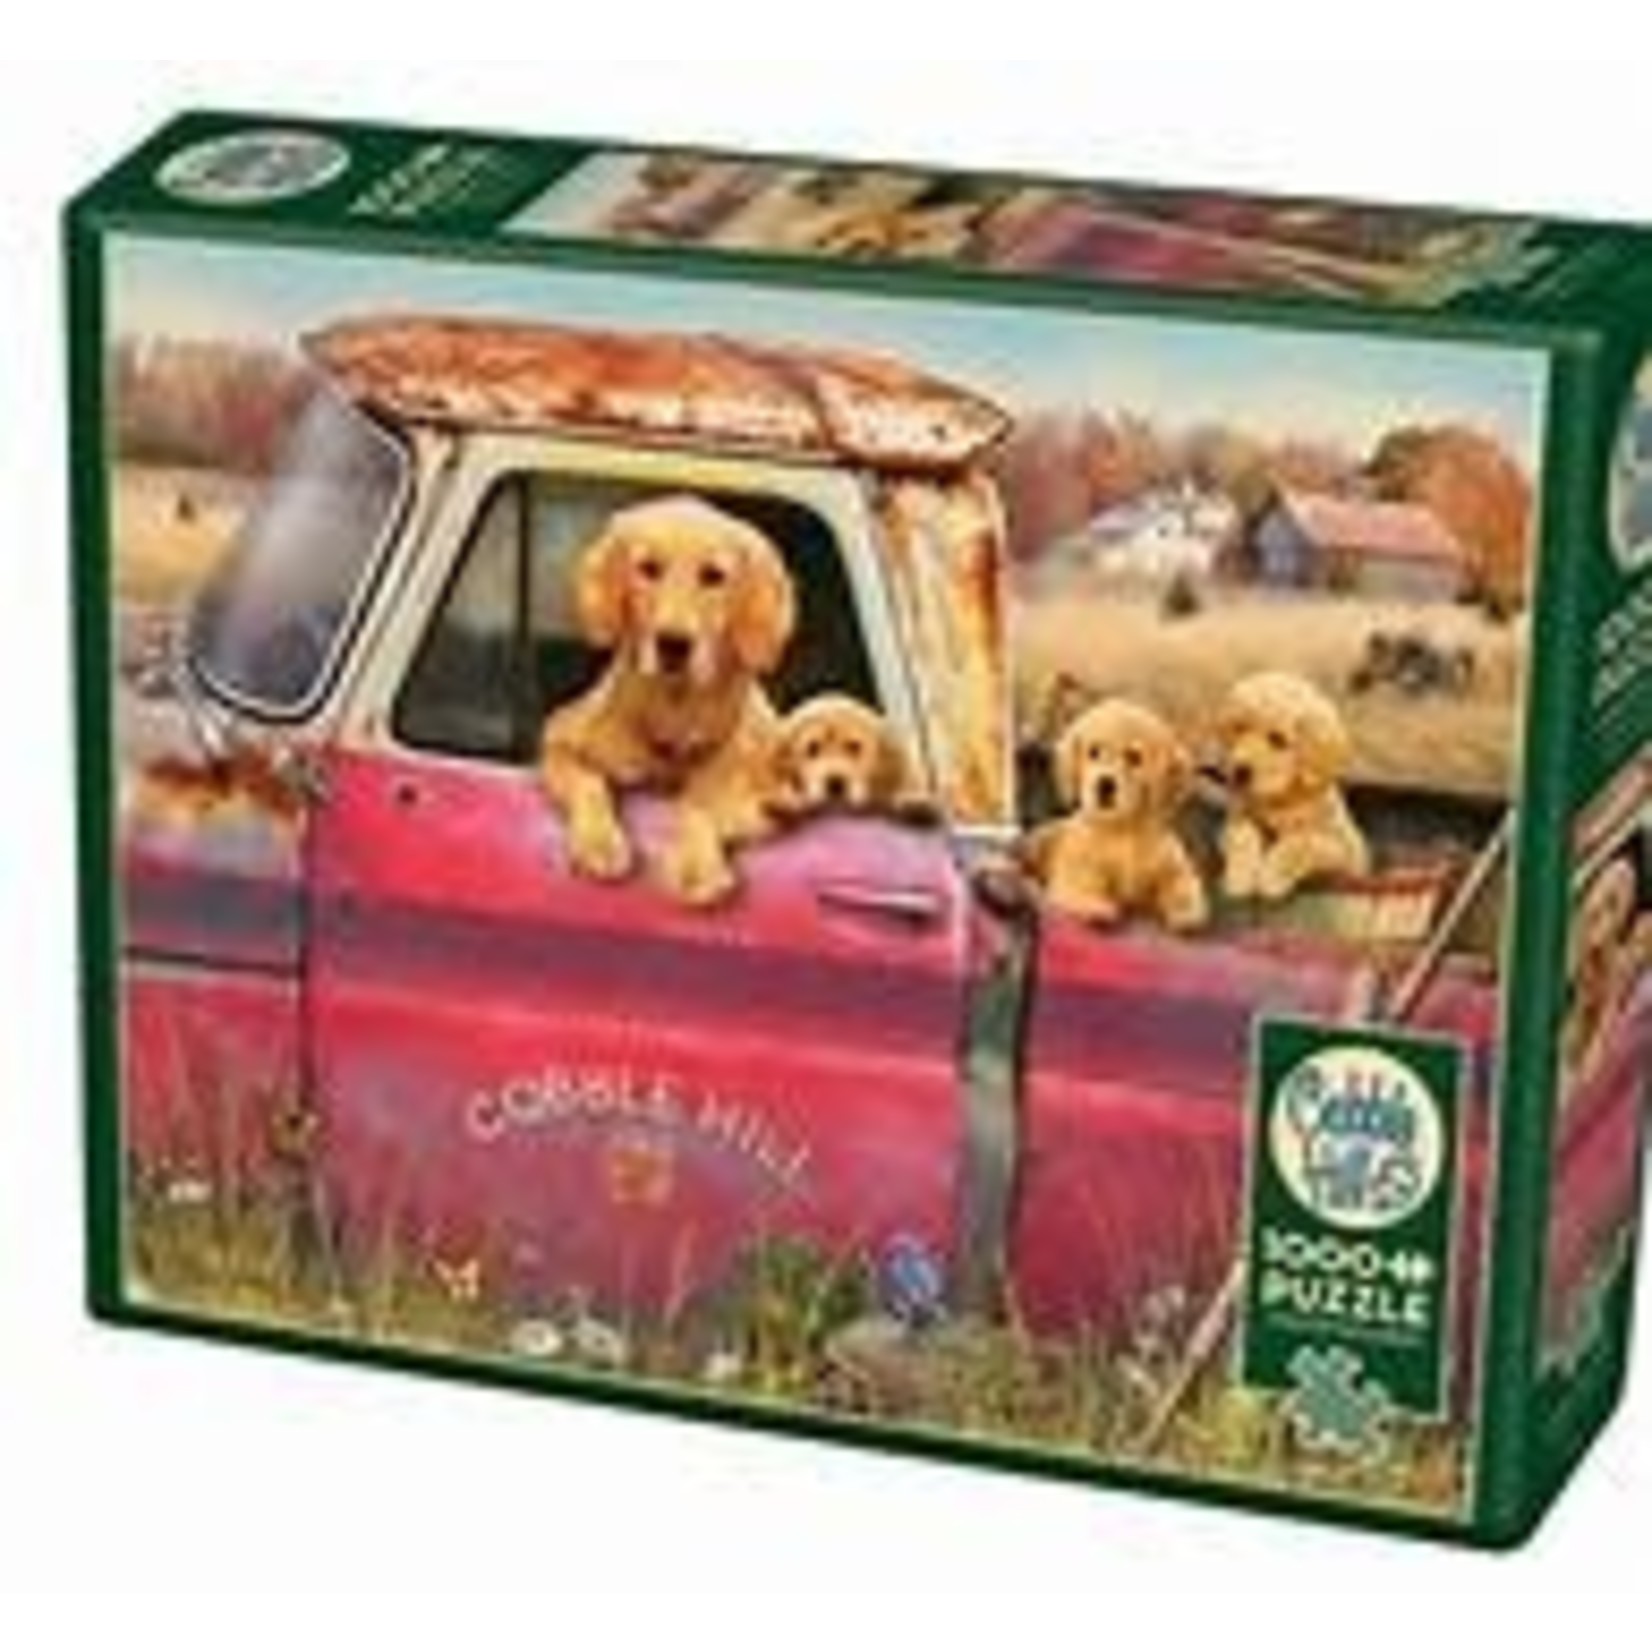 Cobble Hill Pickup Truck w/Dog & Puppies Puzzle (1000pc)